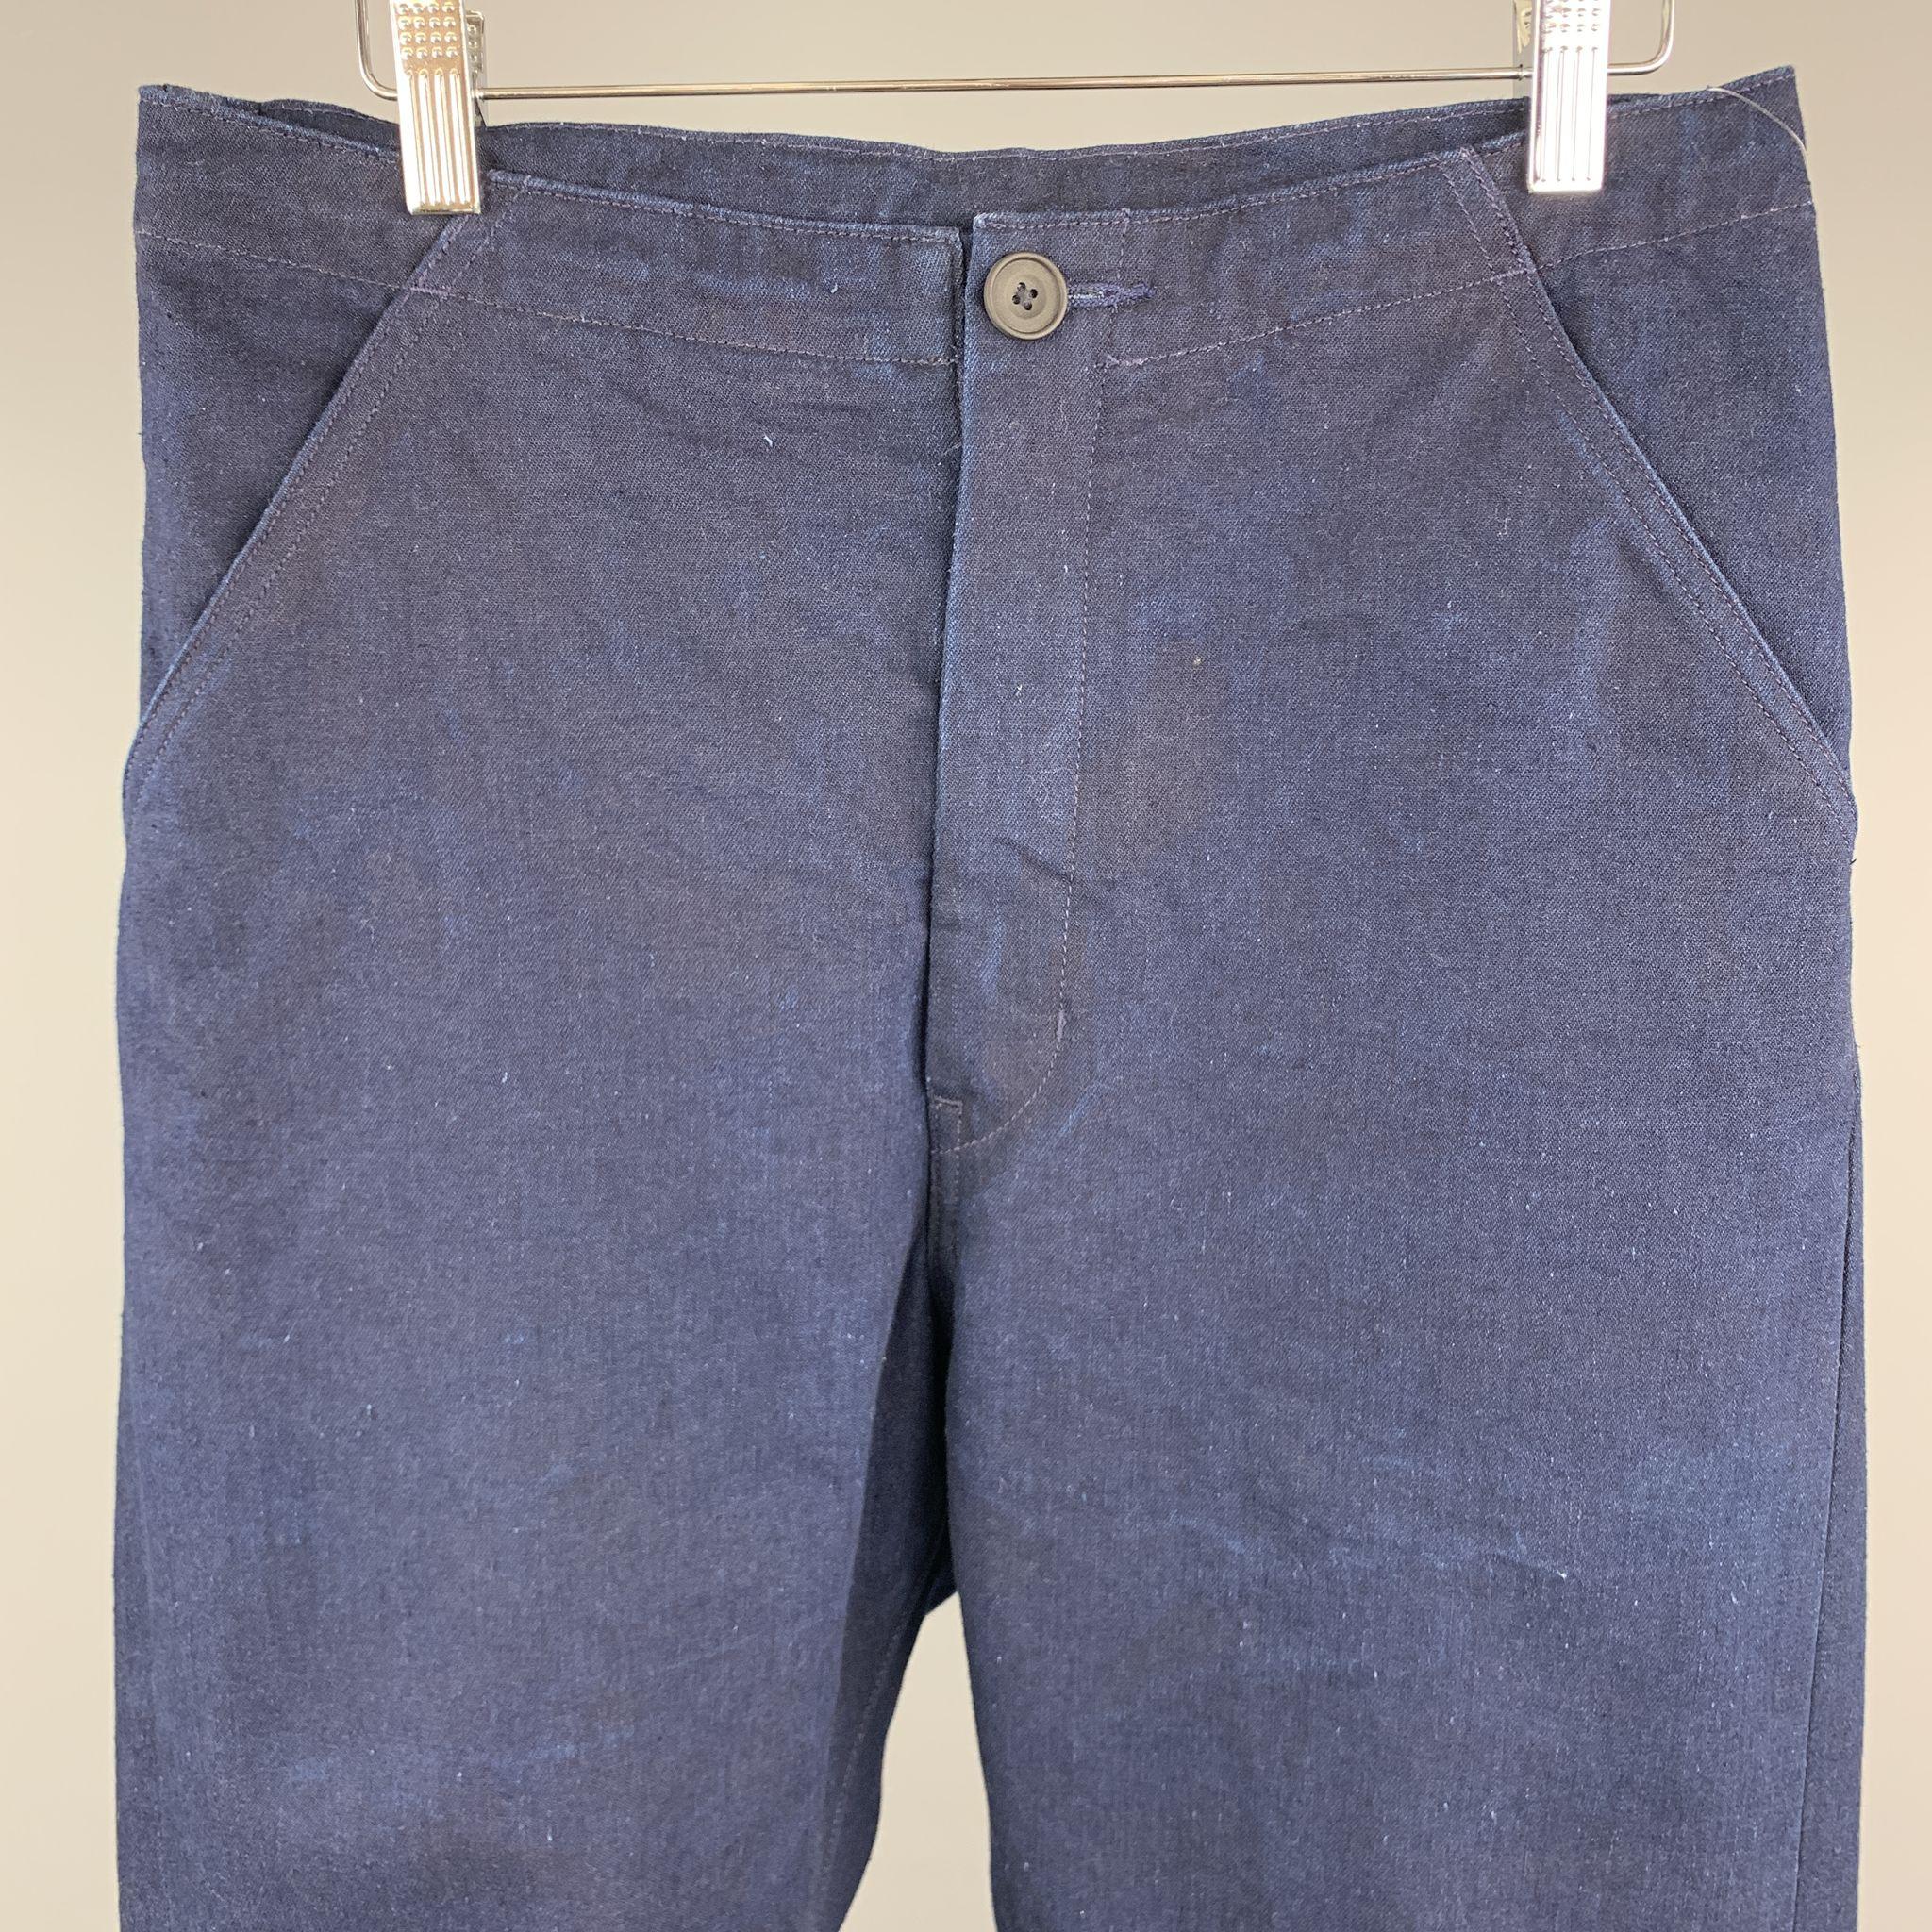 LEVI'S MADE & CRAFTED Casual Pants comes in a indigo cotton featuring a dropout style and a zip fly closure.

Excellent Pre-Owned Condition.
Marked: 30

Measurements:

Waist: 30 in. 
Rise: 11 in. 
Inseam: 28 in.
SKU: 88619
Category: Casual